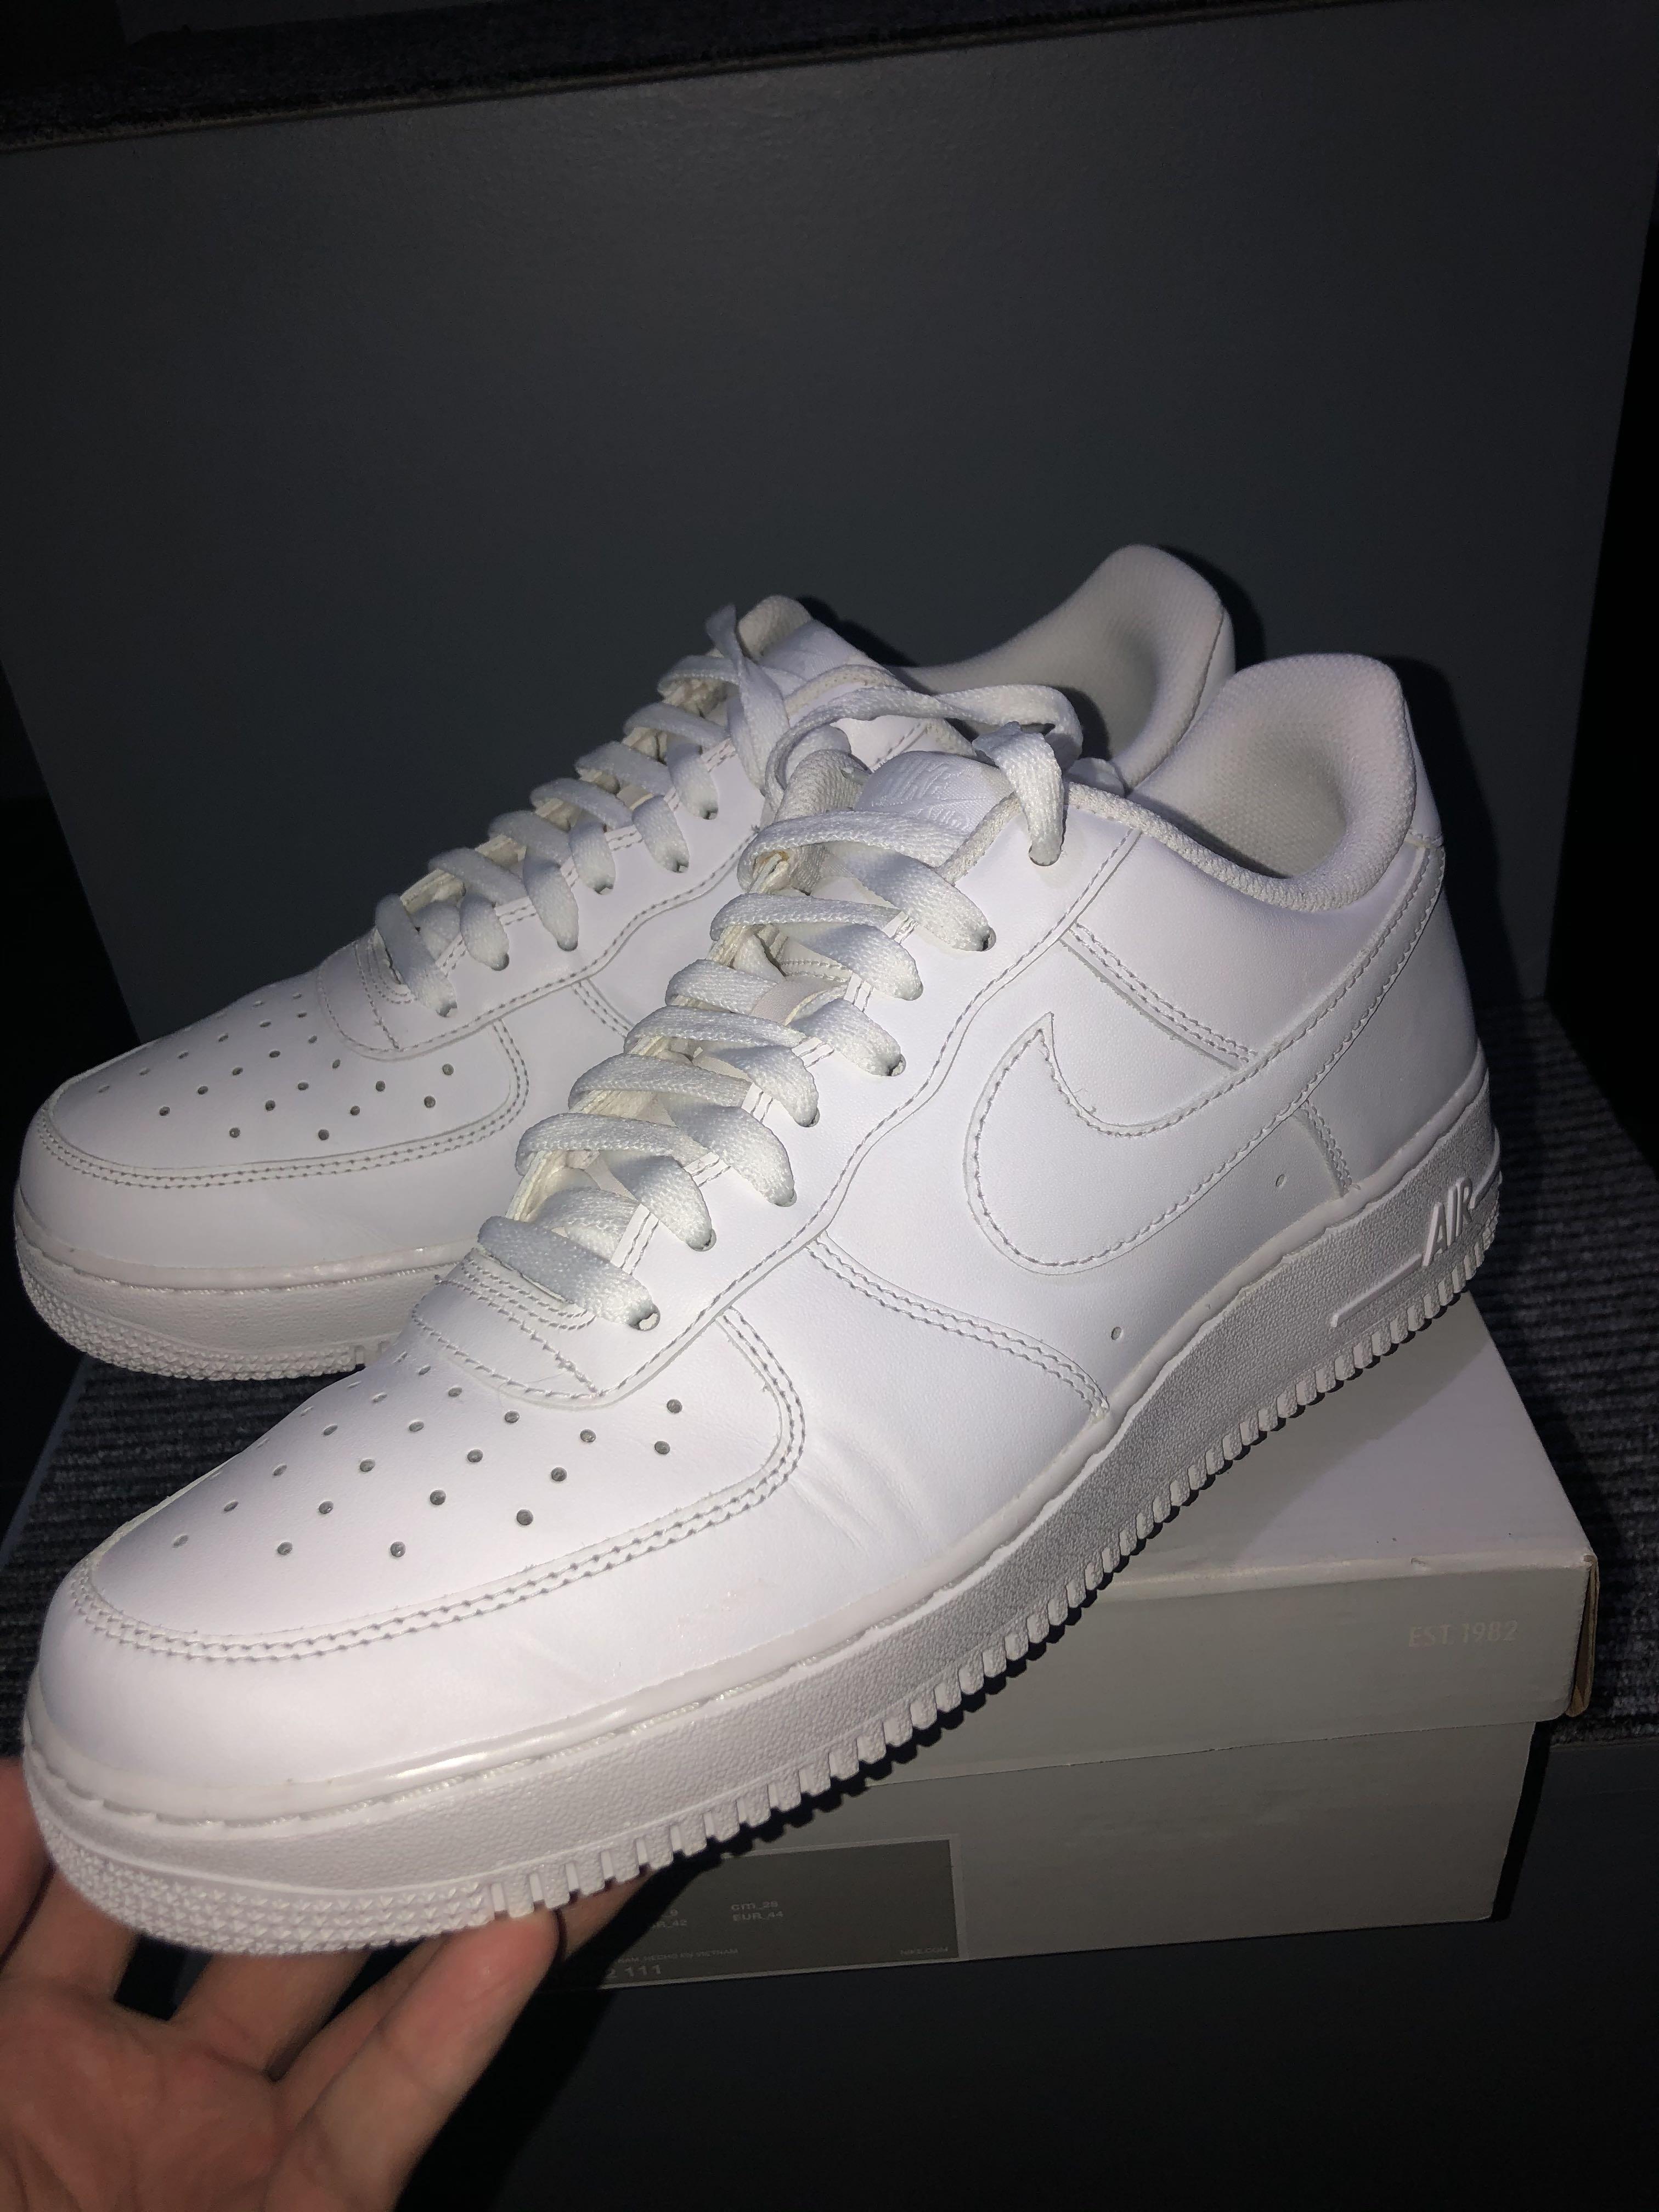 white forces size 10